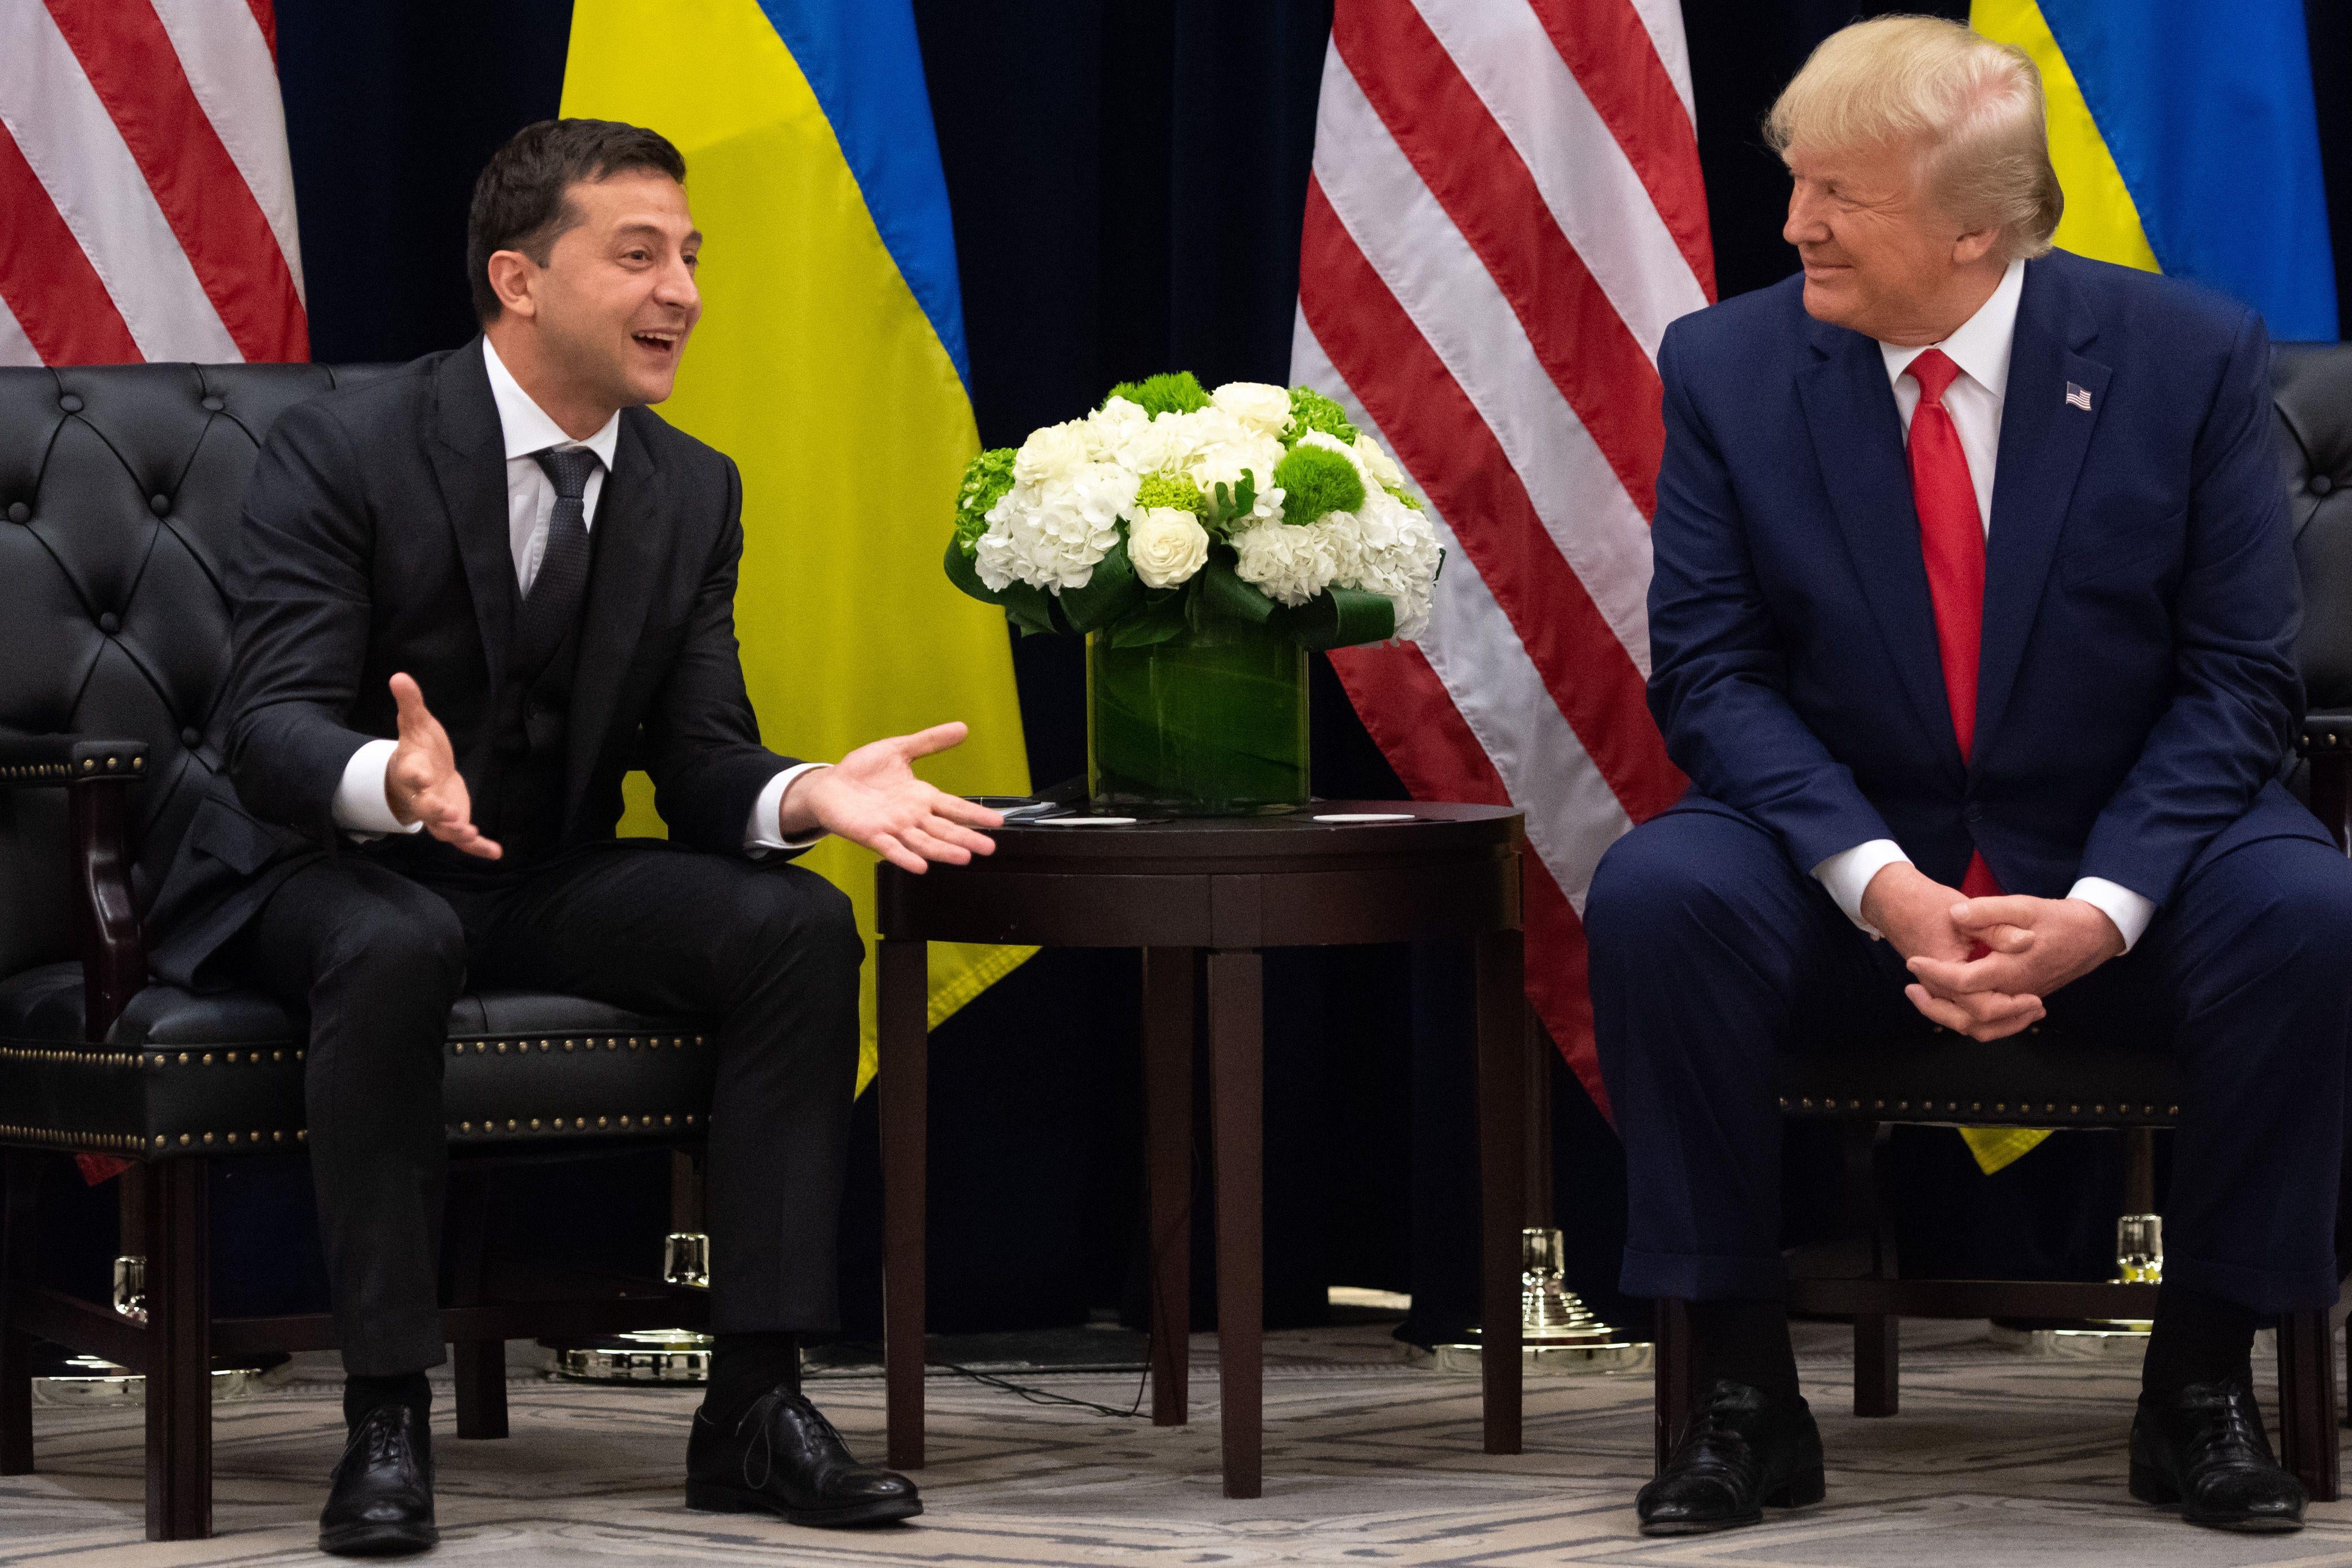 Zelensky smiles and gestures beside Trump smiling at him, both men seated with Ukrainian and U.S. flags behind them.